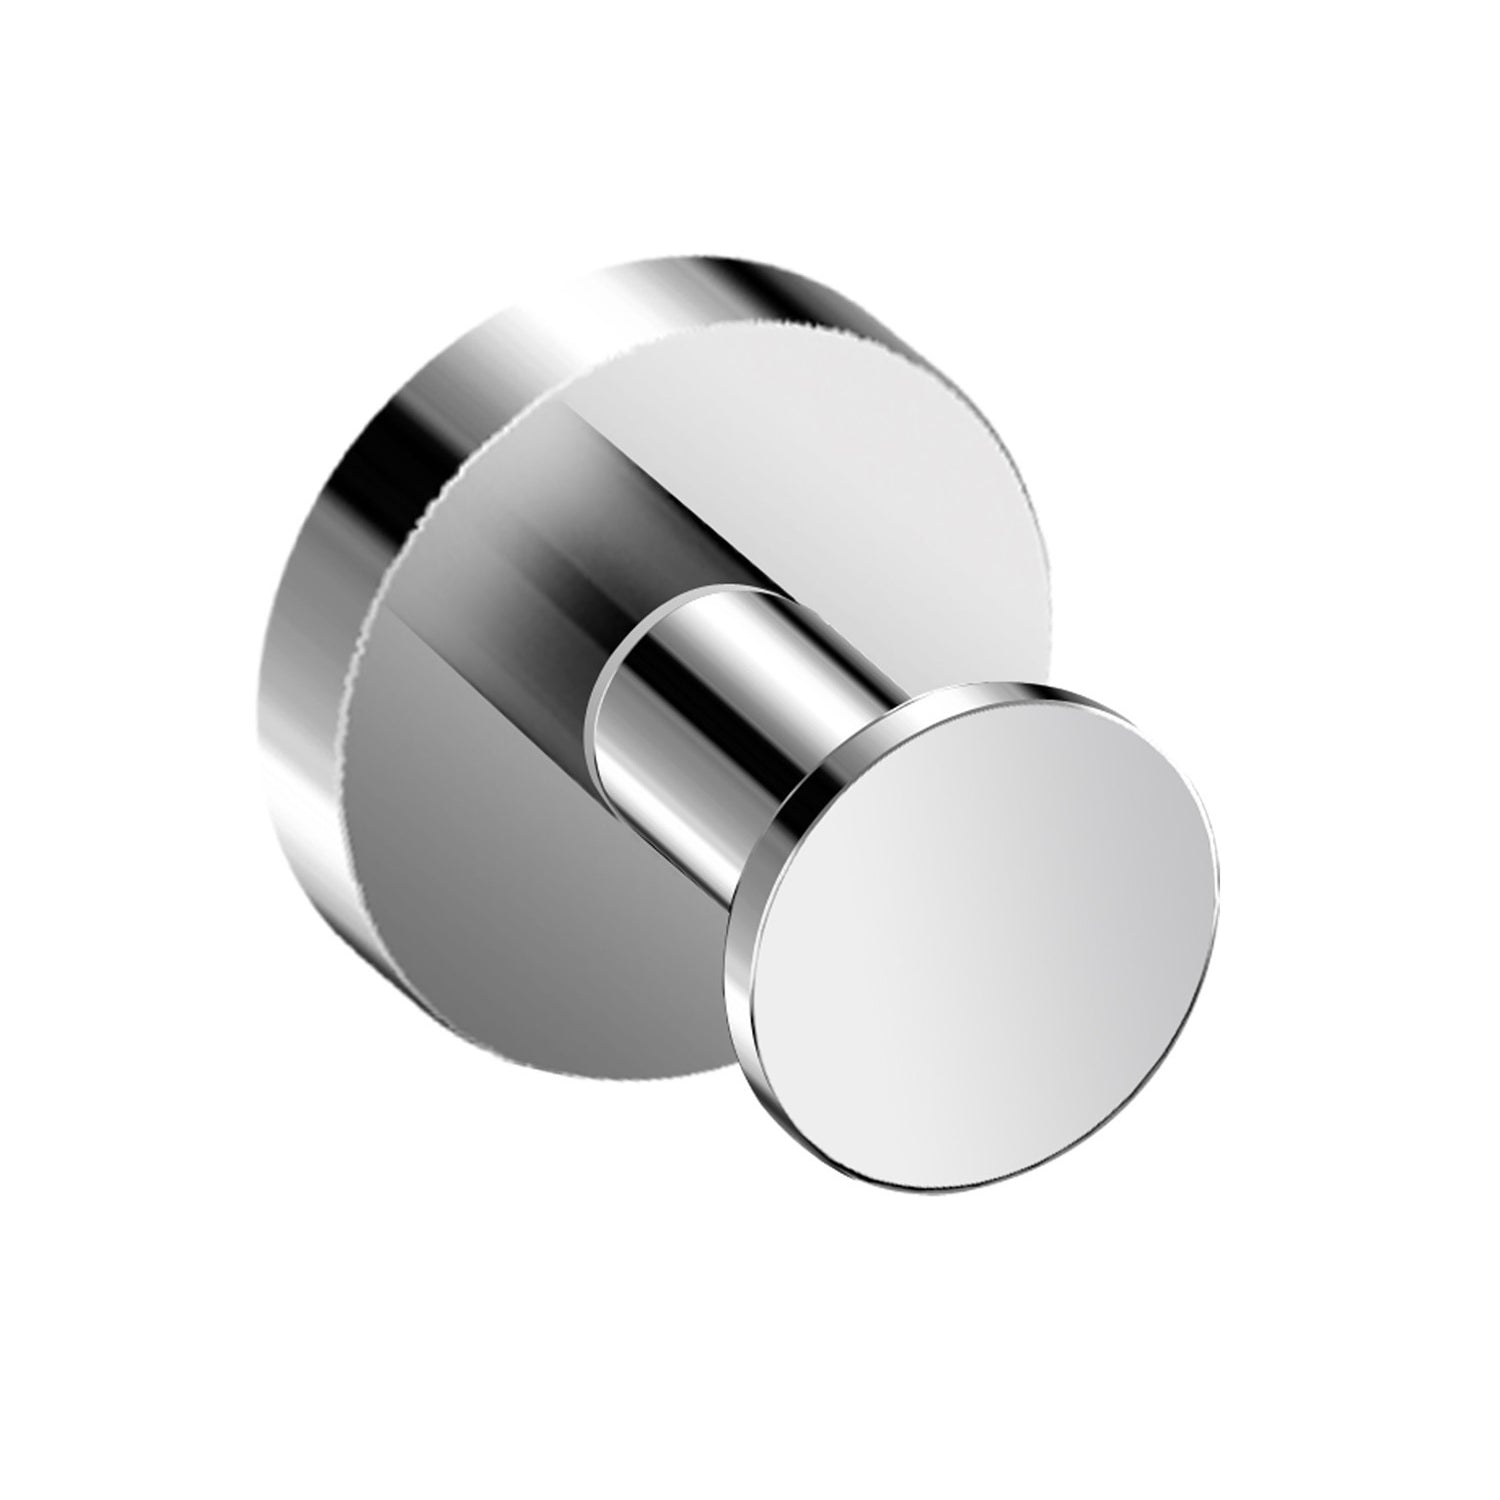 DAX Valencia Towel Hook, Wall Mount Stainless Steel, Chrome Finish, 2 x 1-11/16 x 2 Inches (DAX-GDC120121-CR)